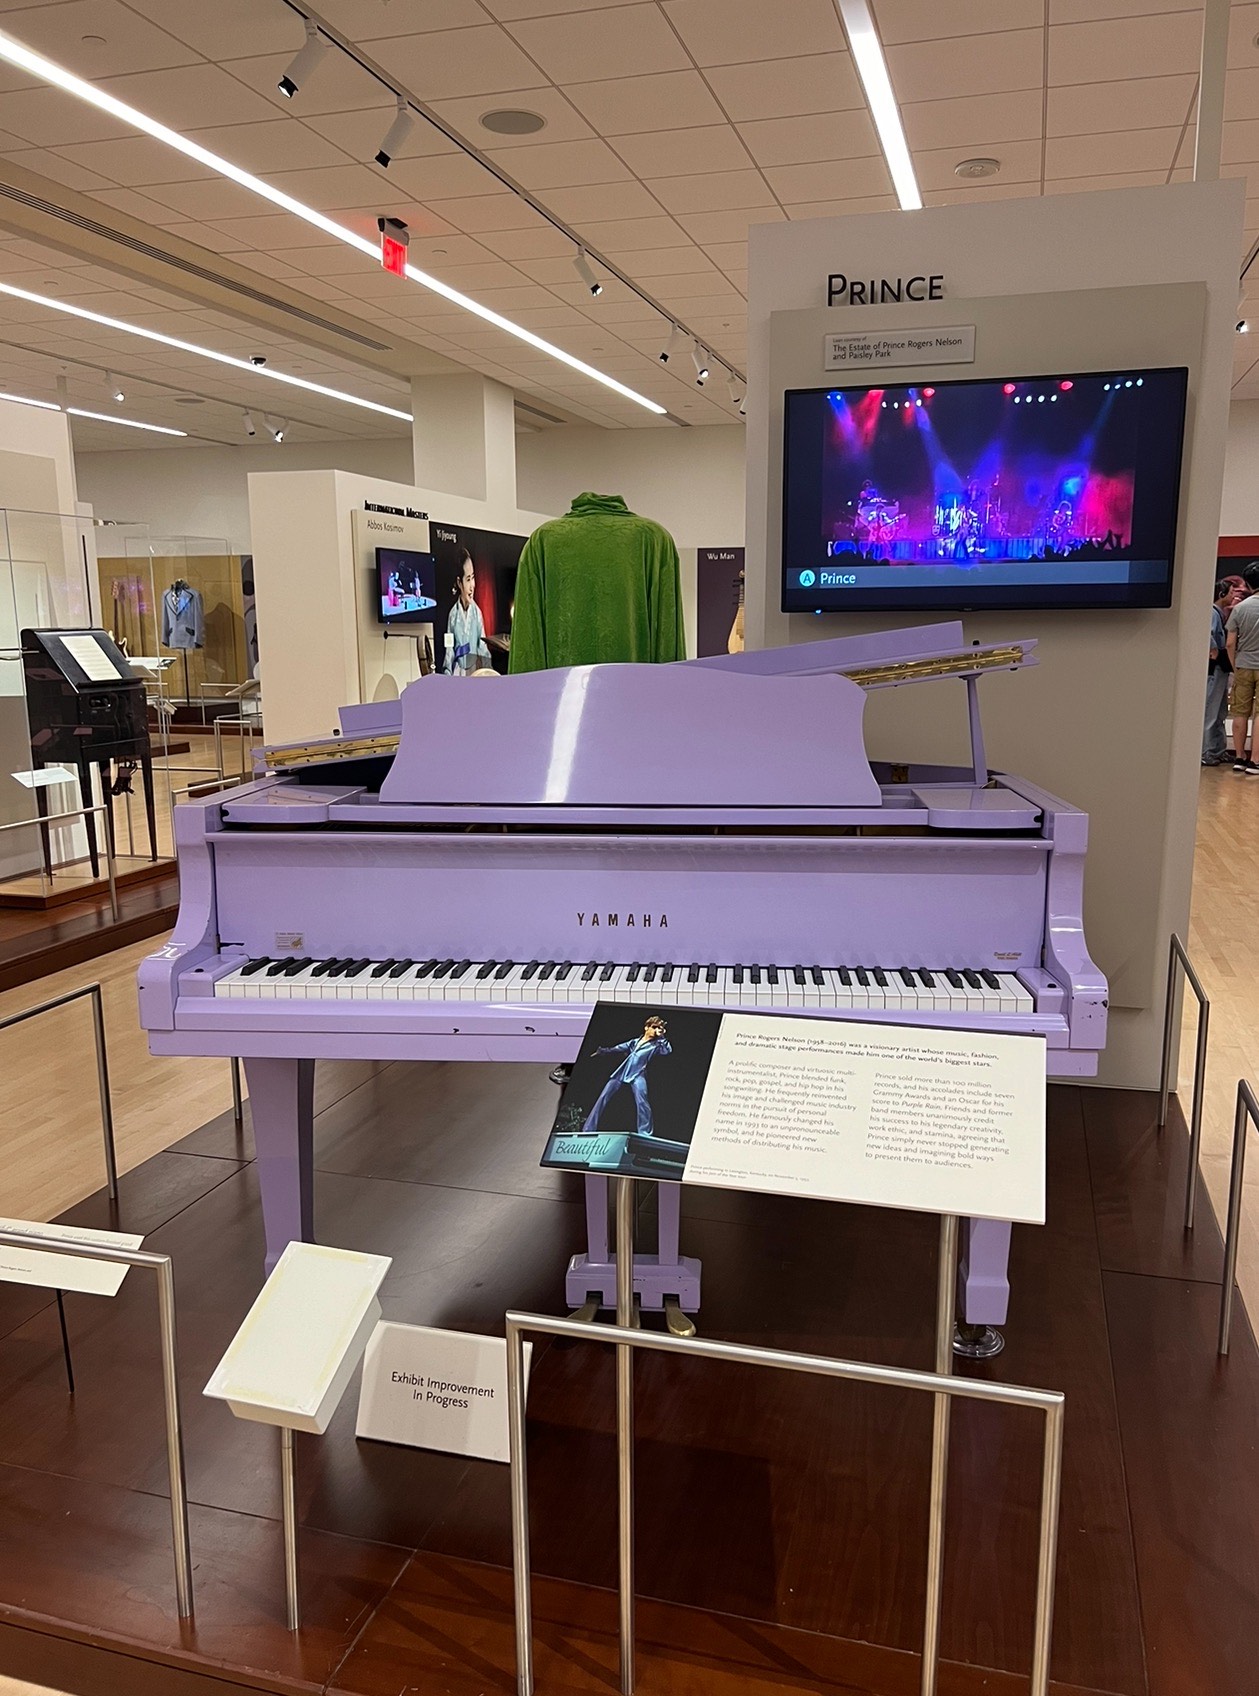 alt txt = "Lavendar piano and green stage costume from Prince at the MIM museum."